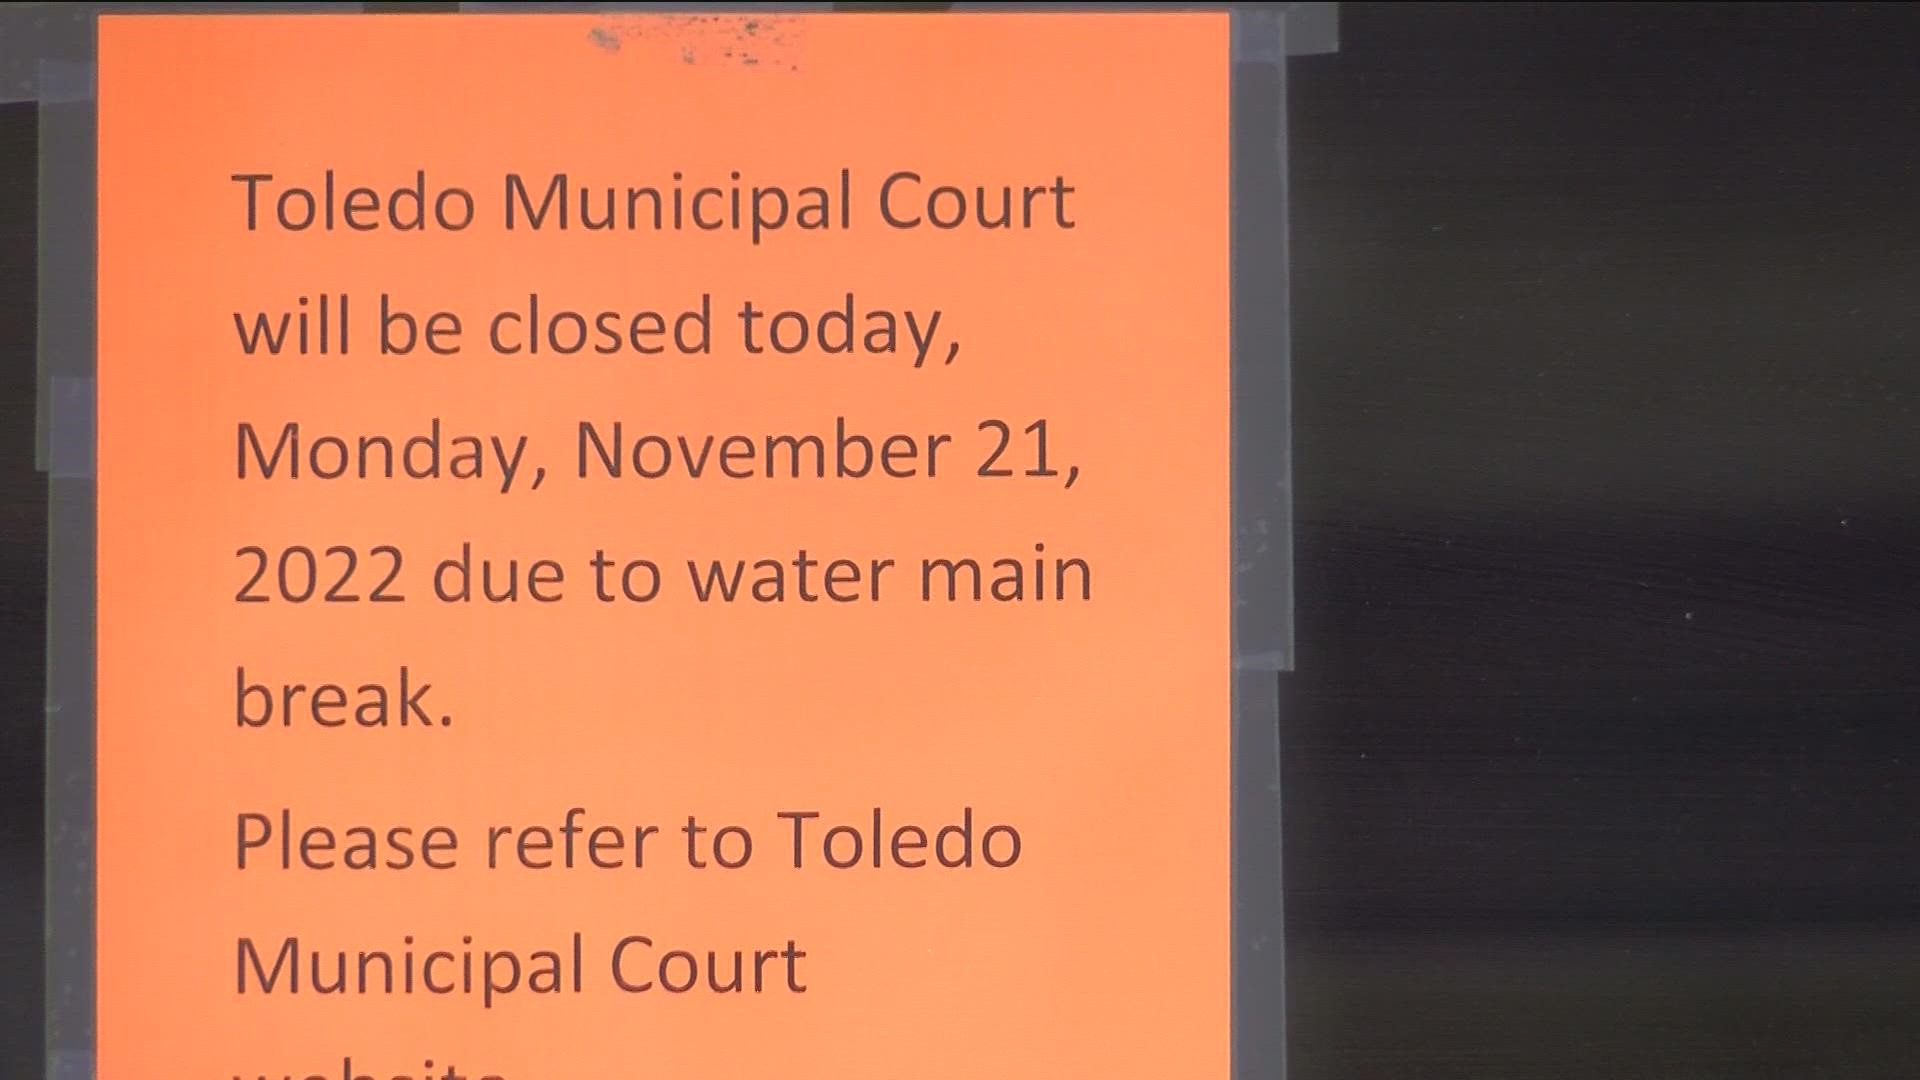 A water main break Monday forced the court to close. Monday's cases will be rescheduled and court will reopen Tuesday.